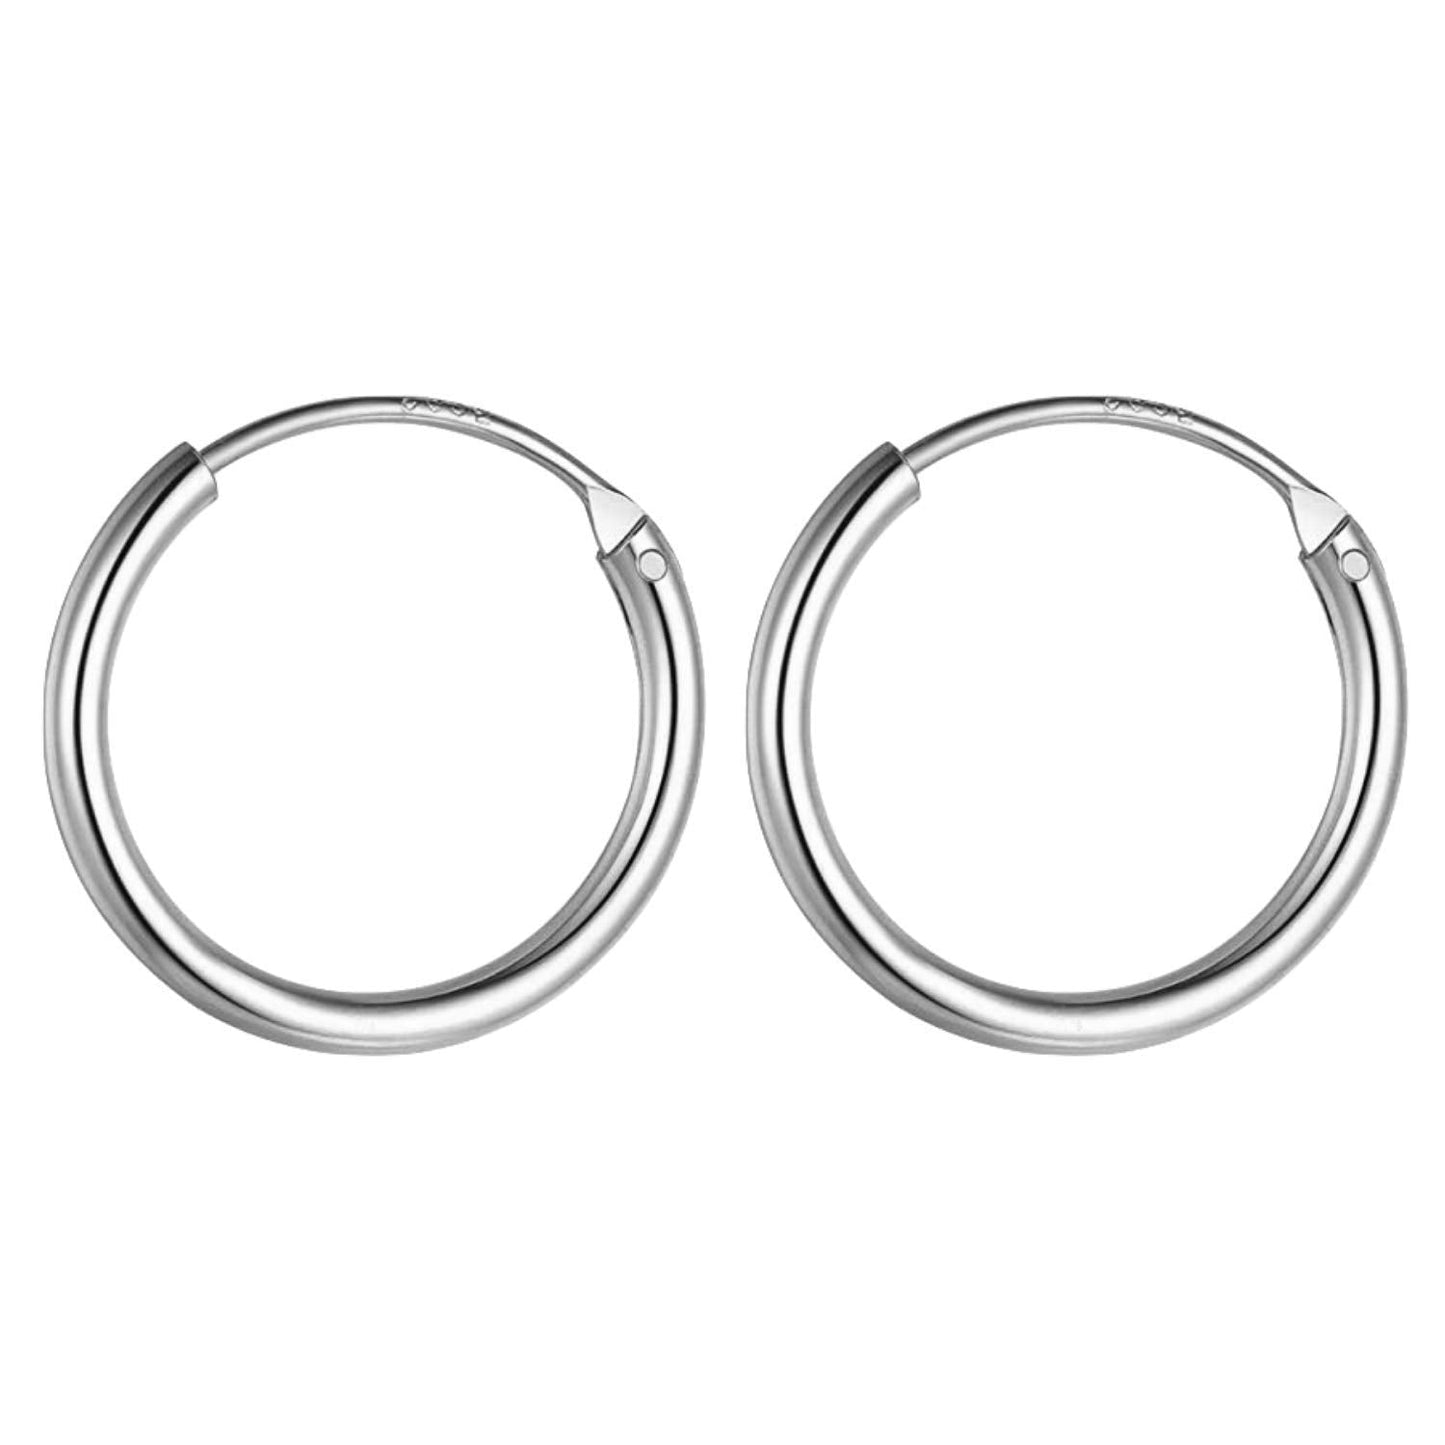 Classic Hoop Earrings - 92.5 Silver - 1.2mm Thickness - Small Sizes 10mm to 20mm